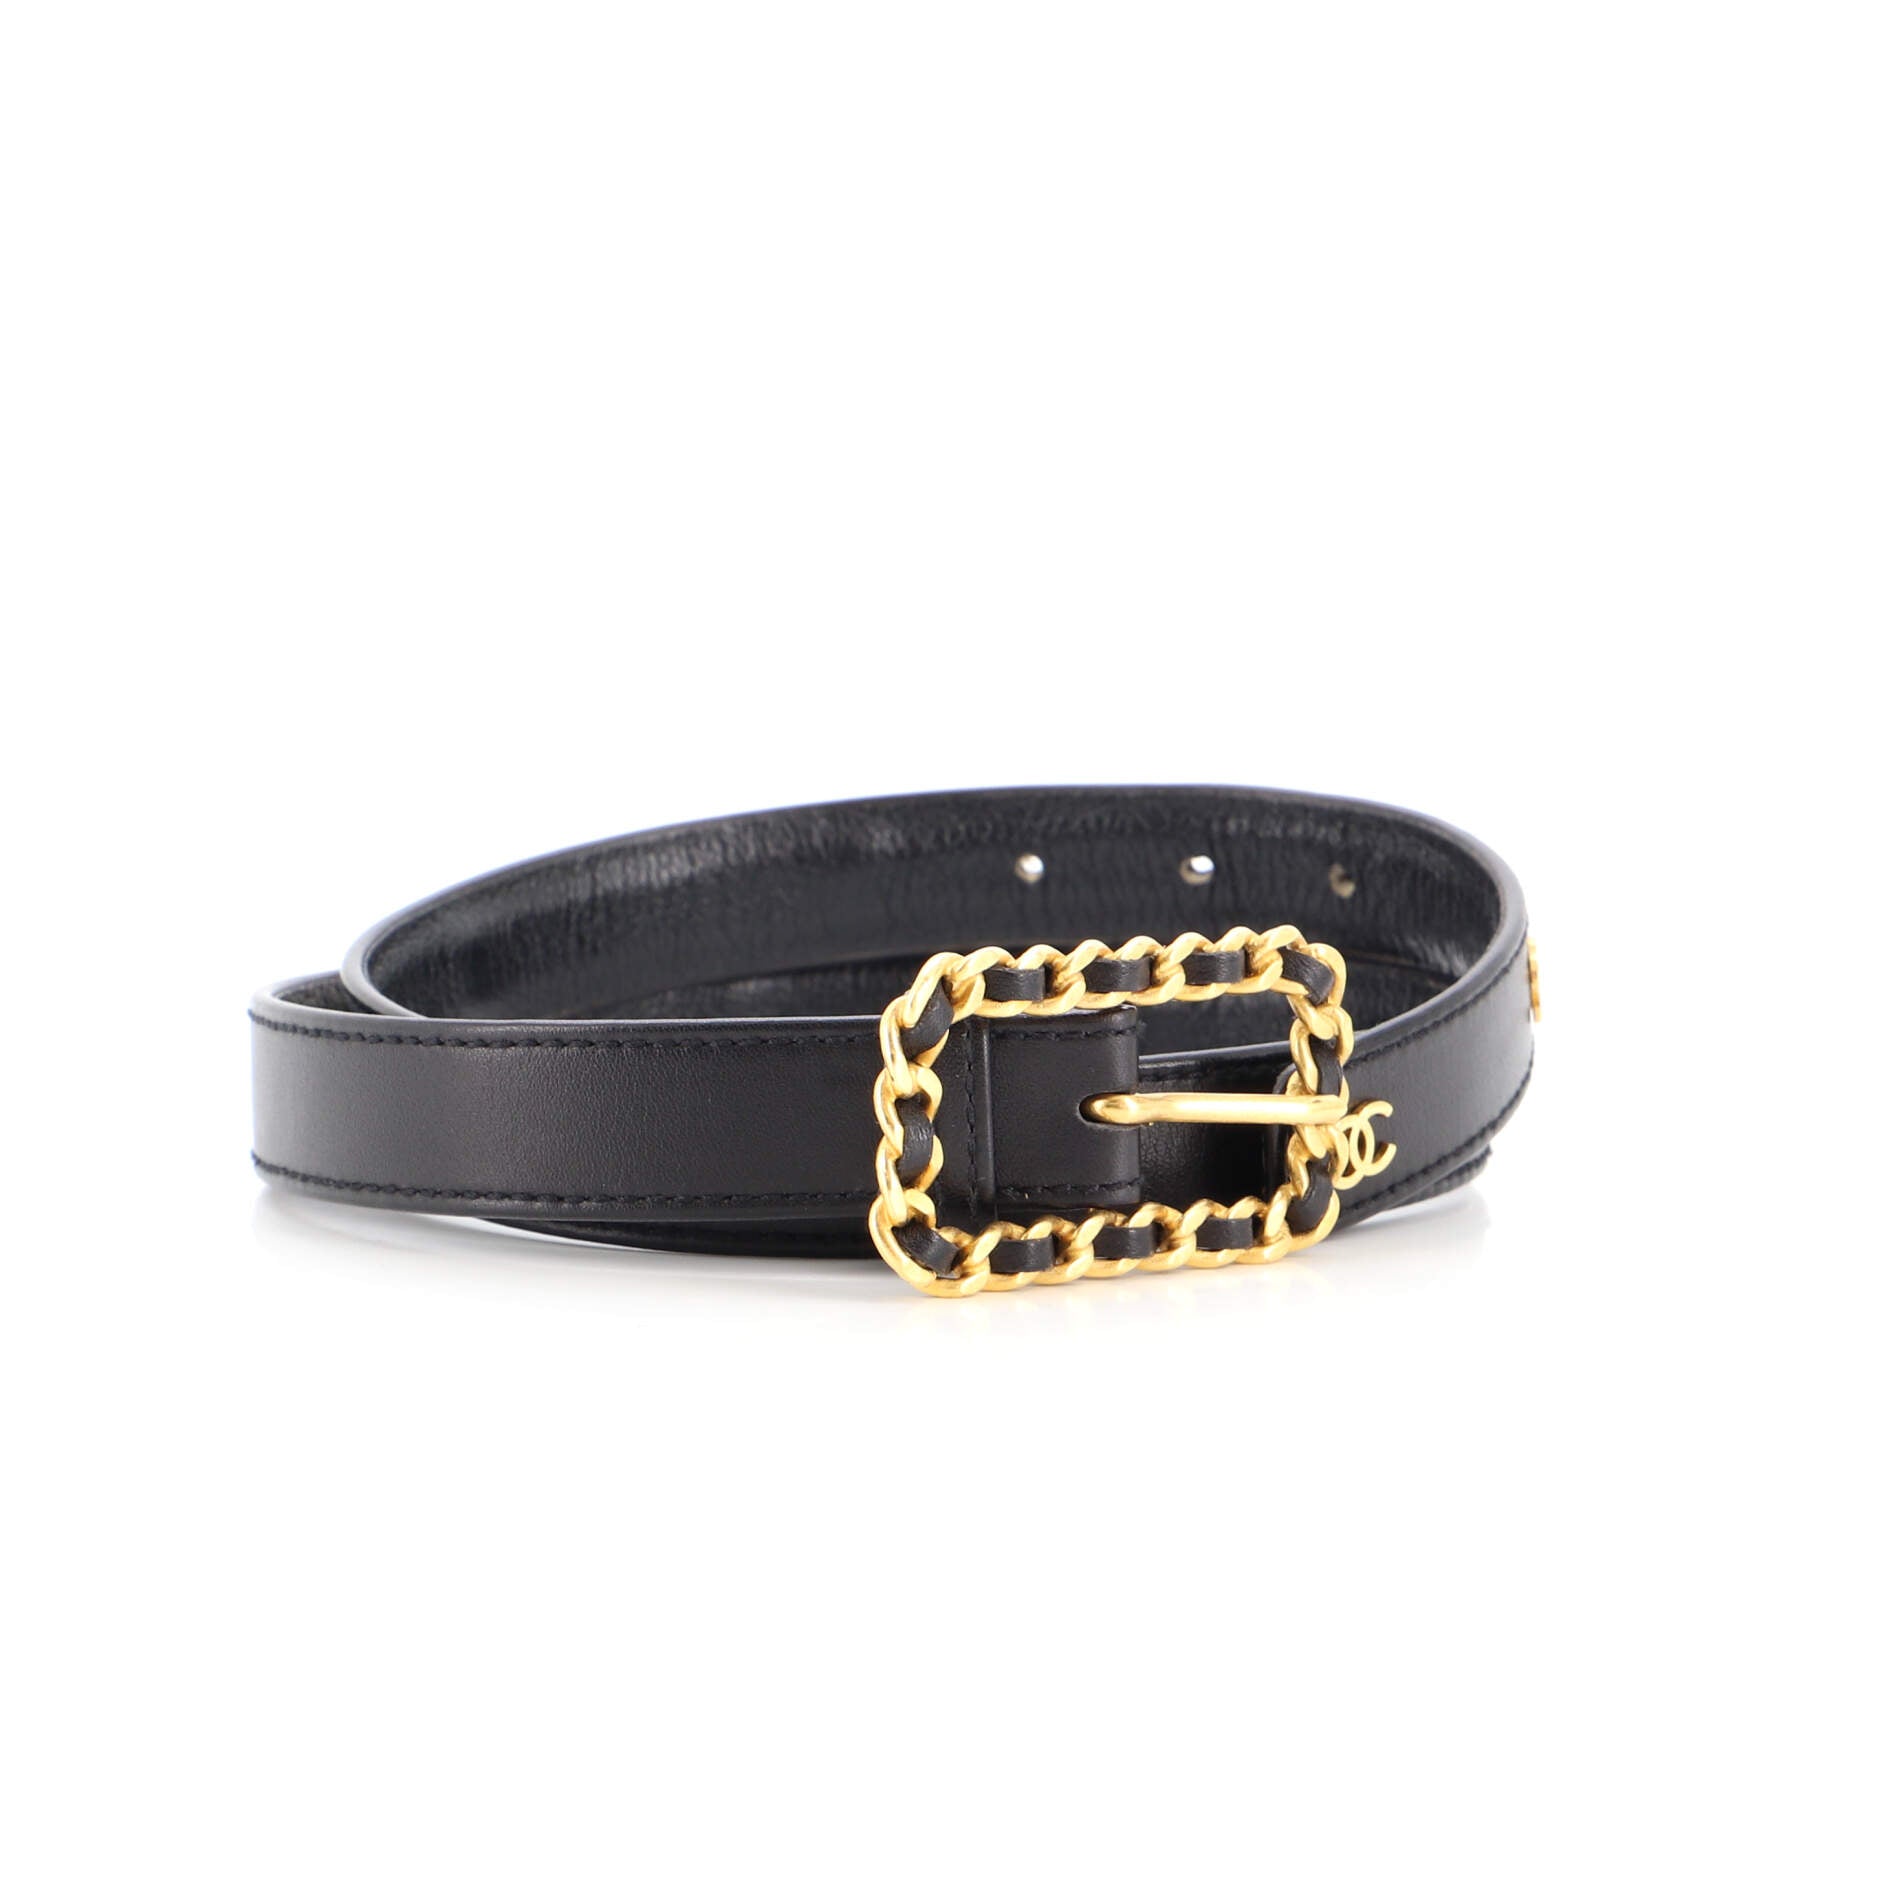 CHANEL Vintage Multi CC Chain Buckle Belt Leather Thin 65